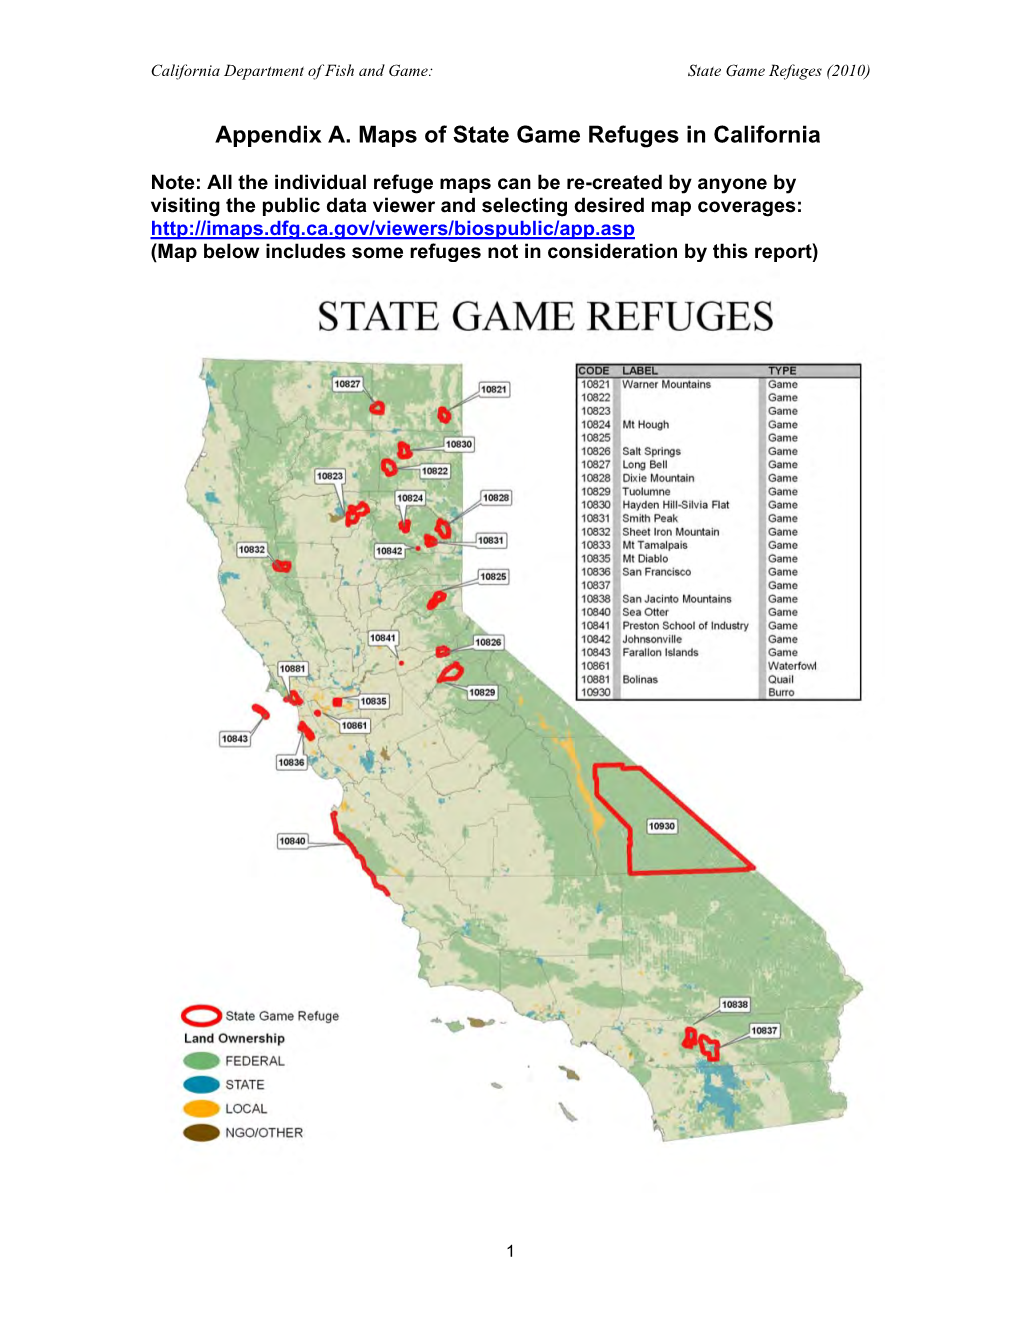 Appendix A. Maps of State Game Refuges in California